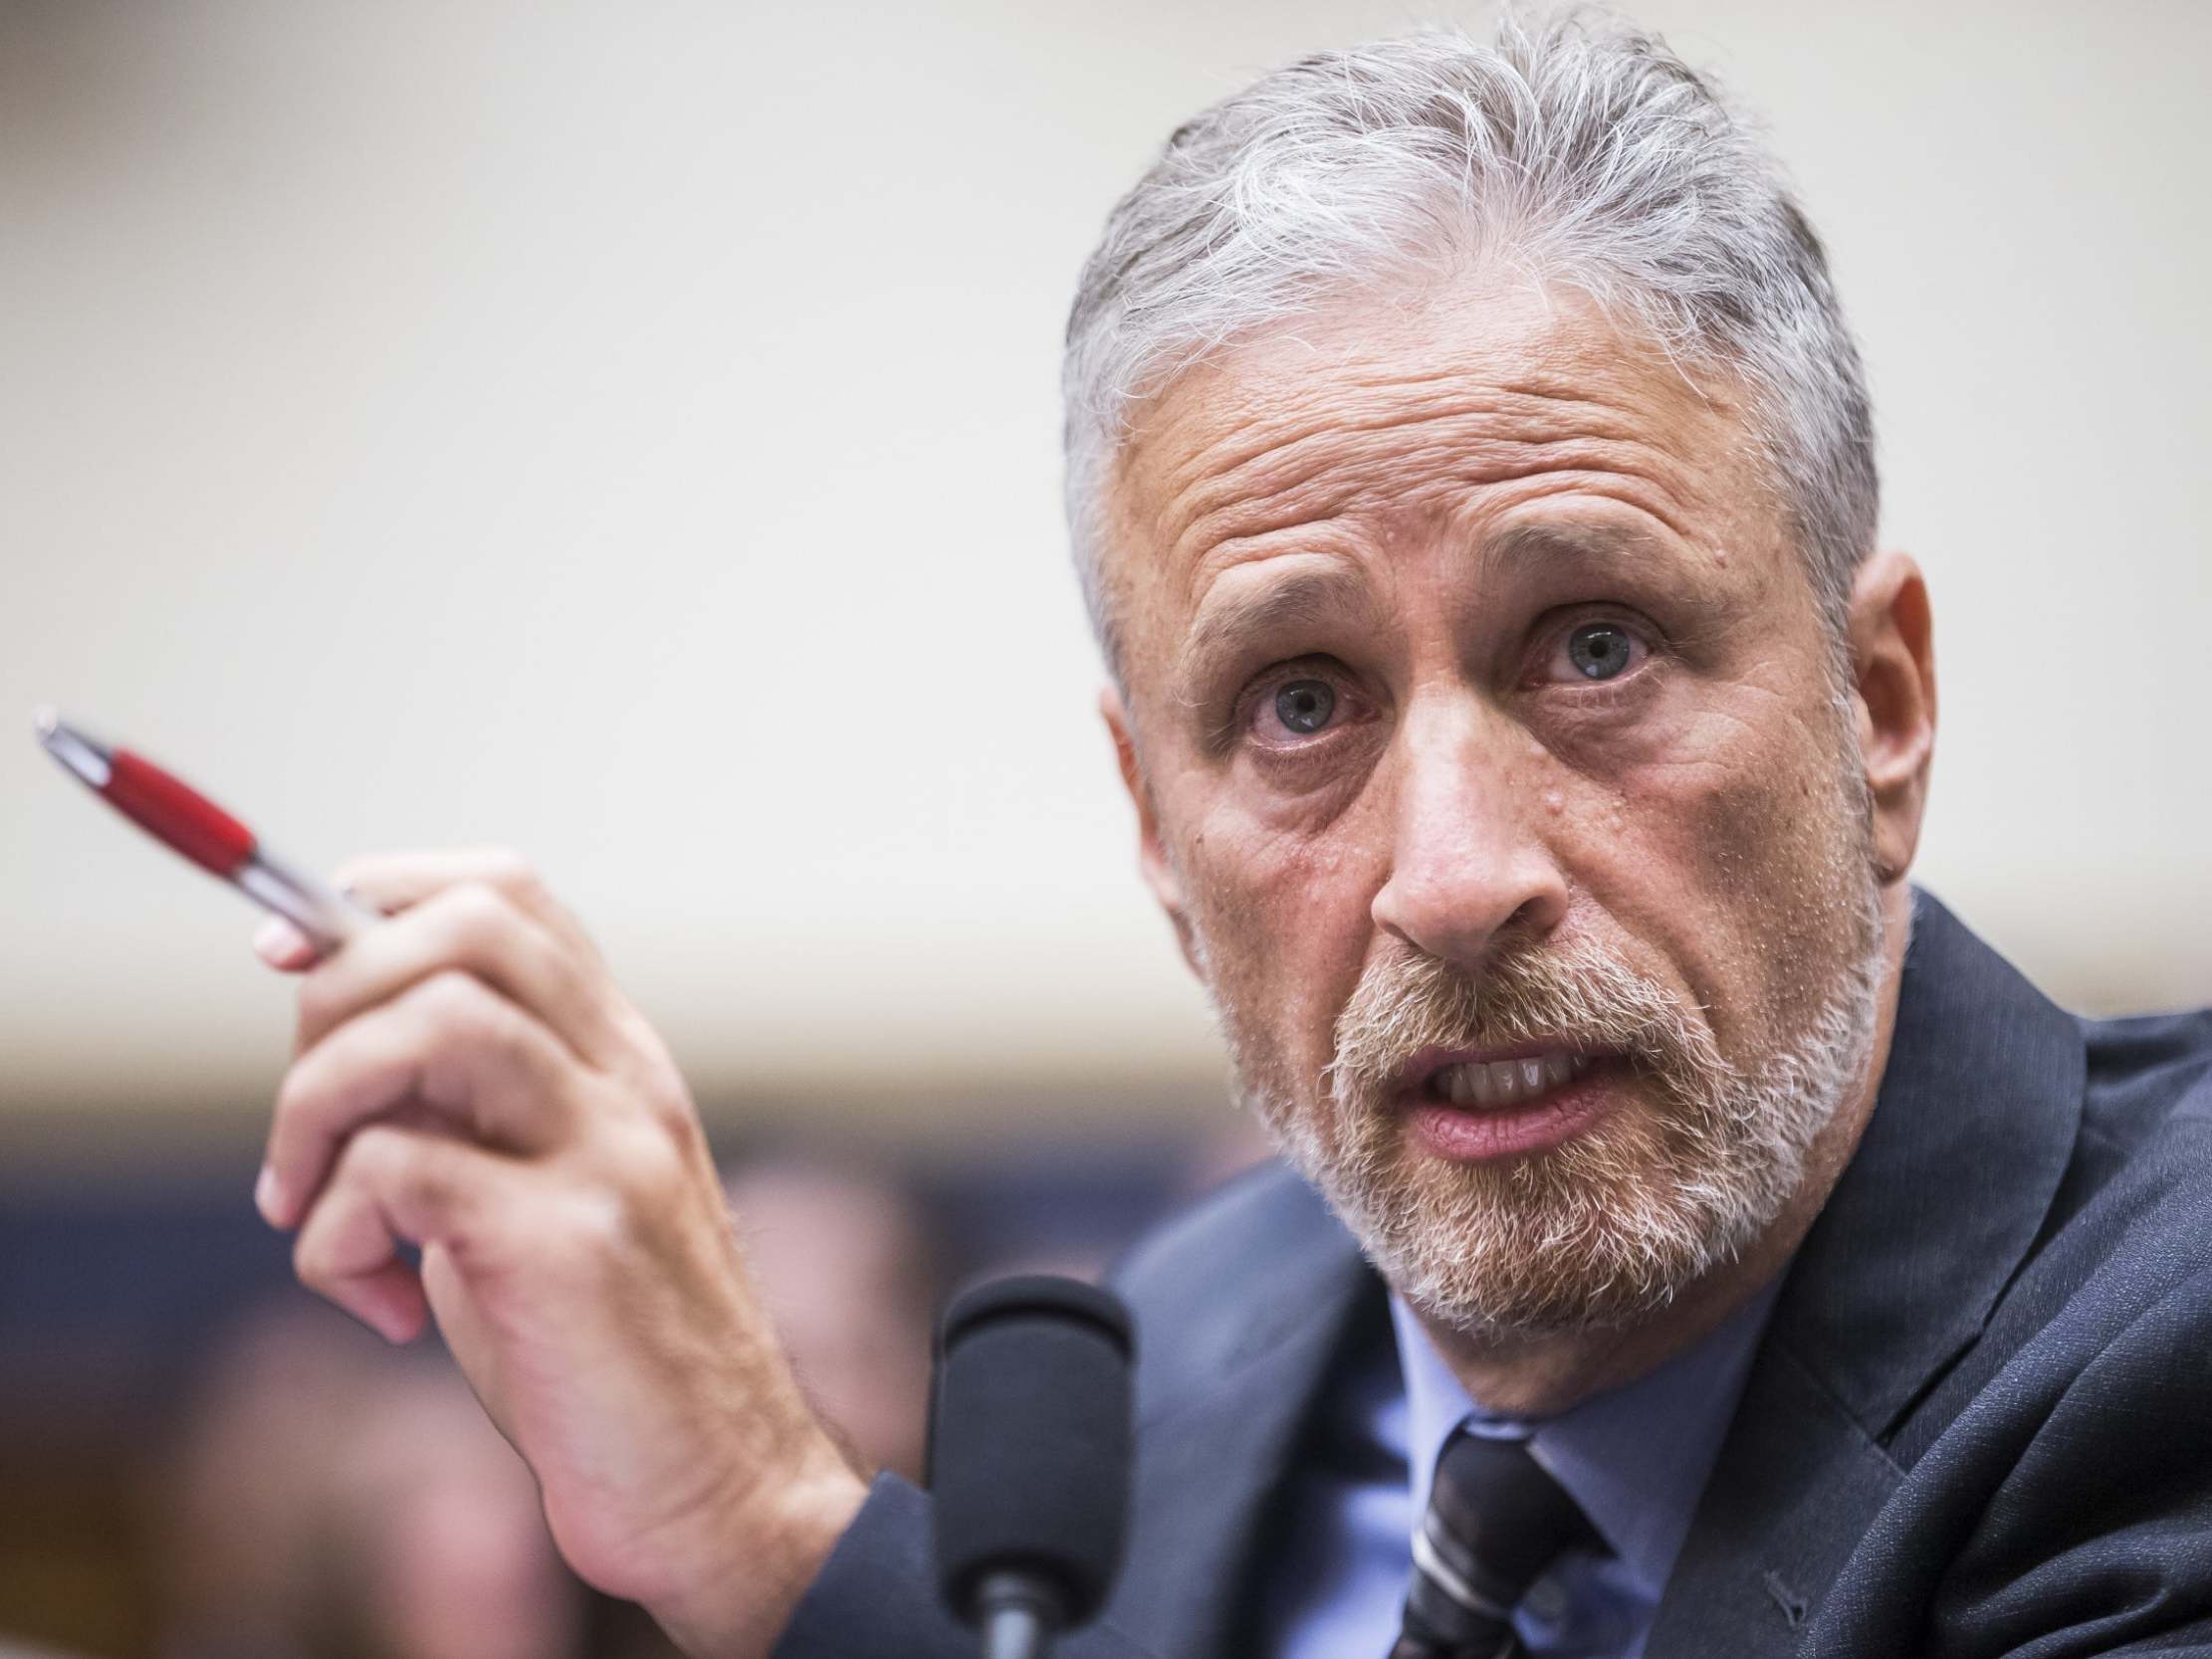 Jon Stewart attacks Congress over 'empty' 9/11 first responder hearing: 'A stain on this institution'